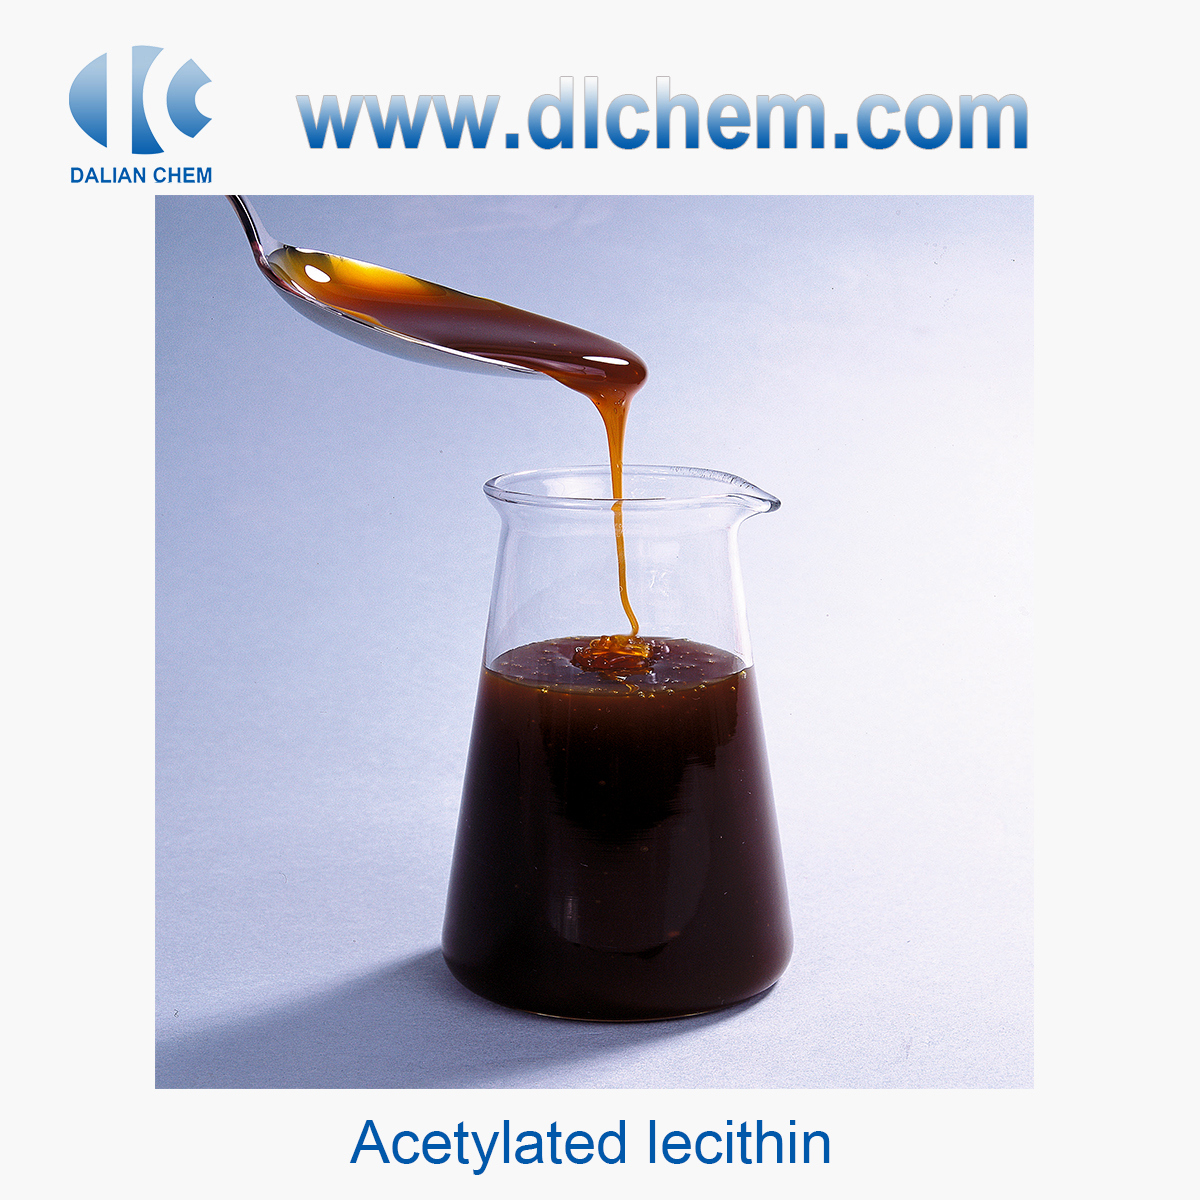 Acetylated lecithin